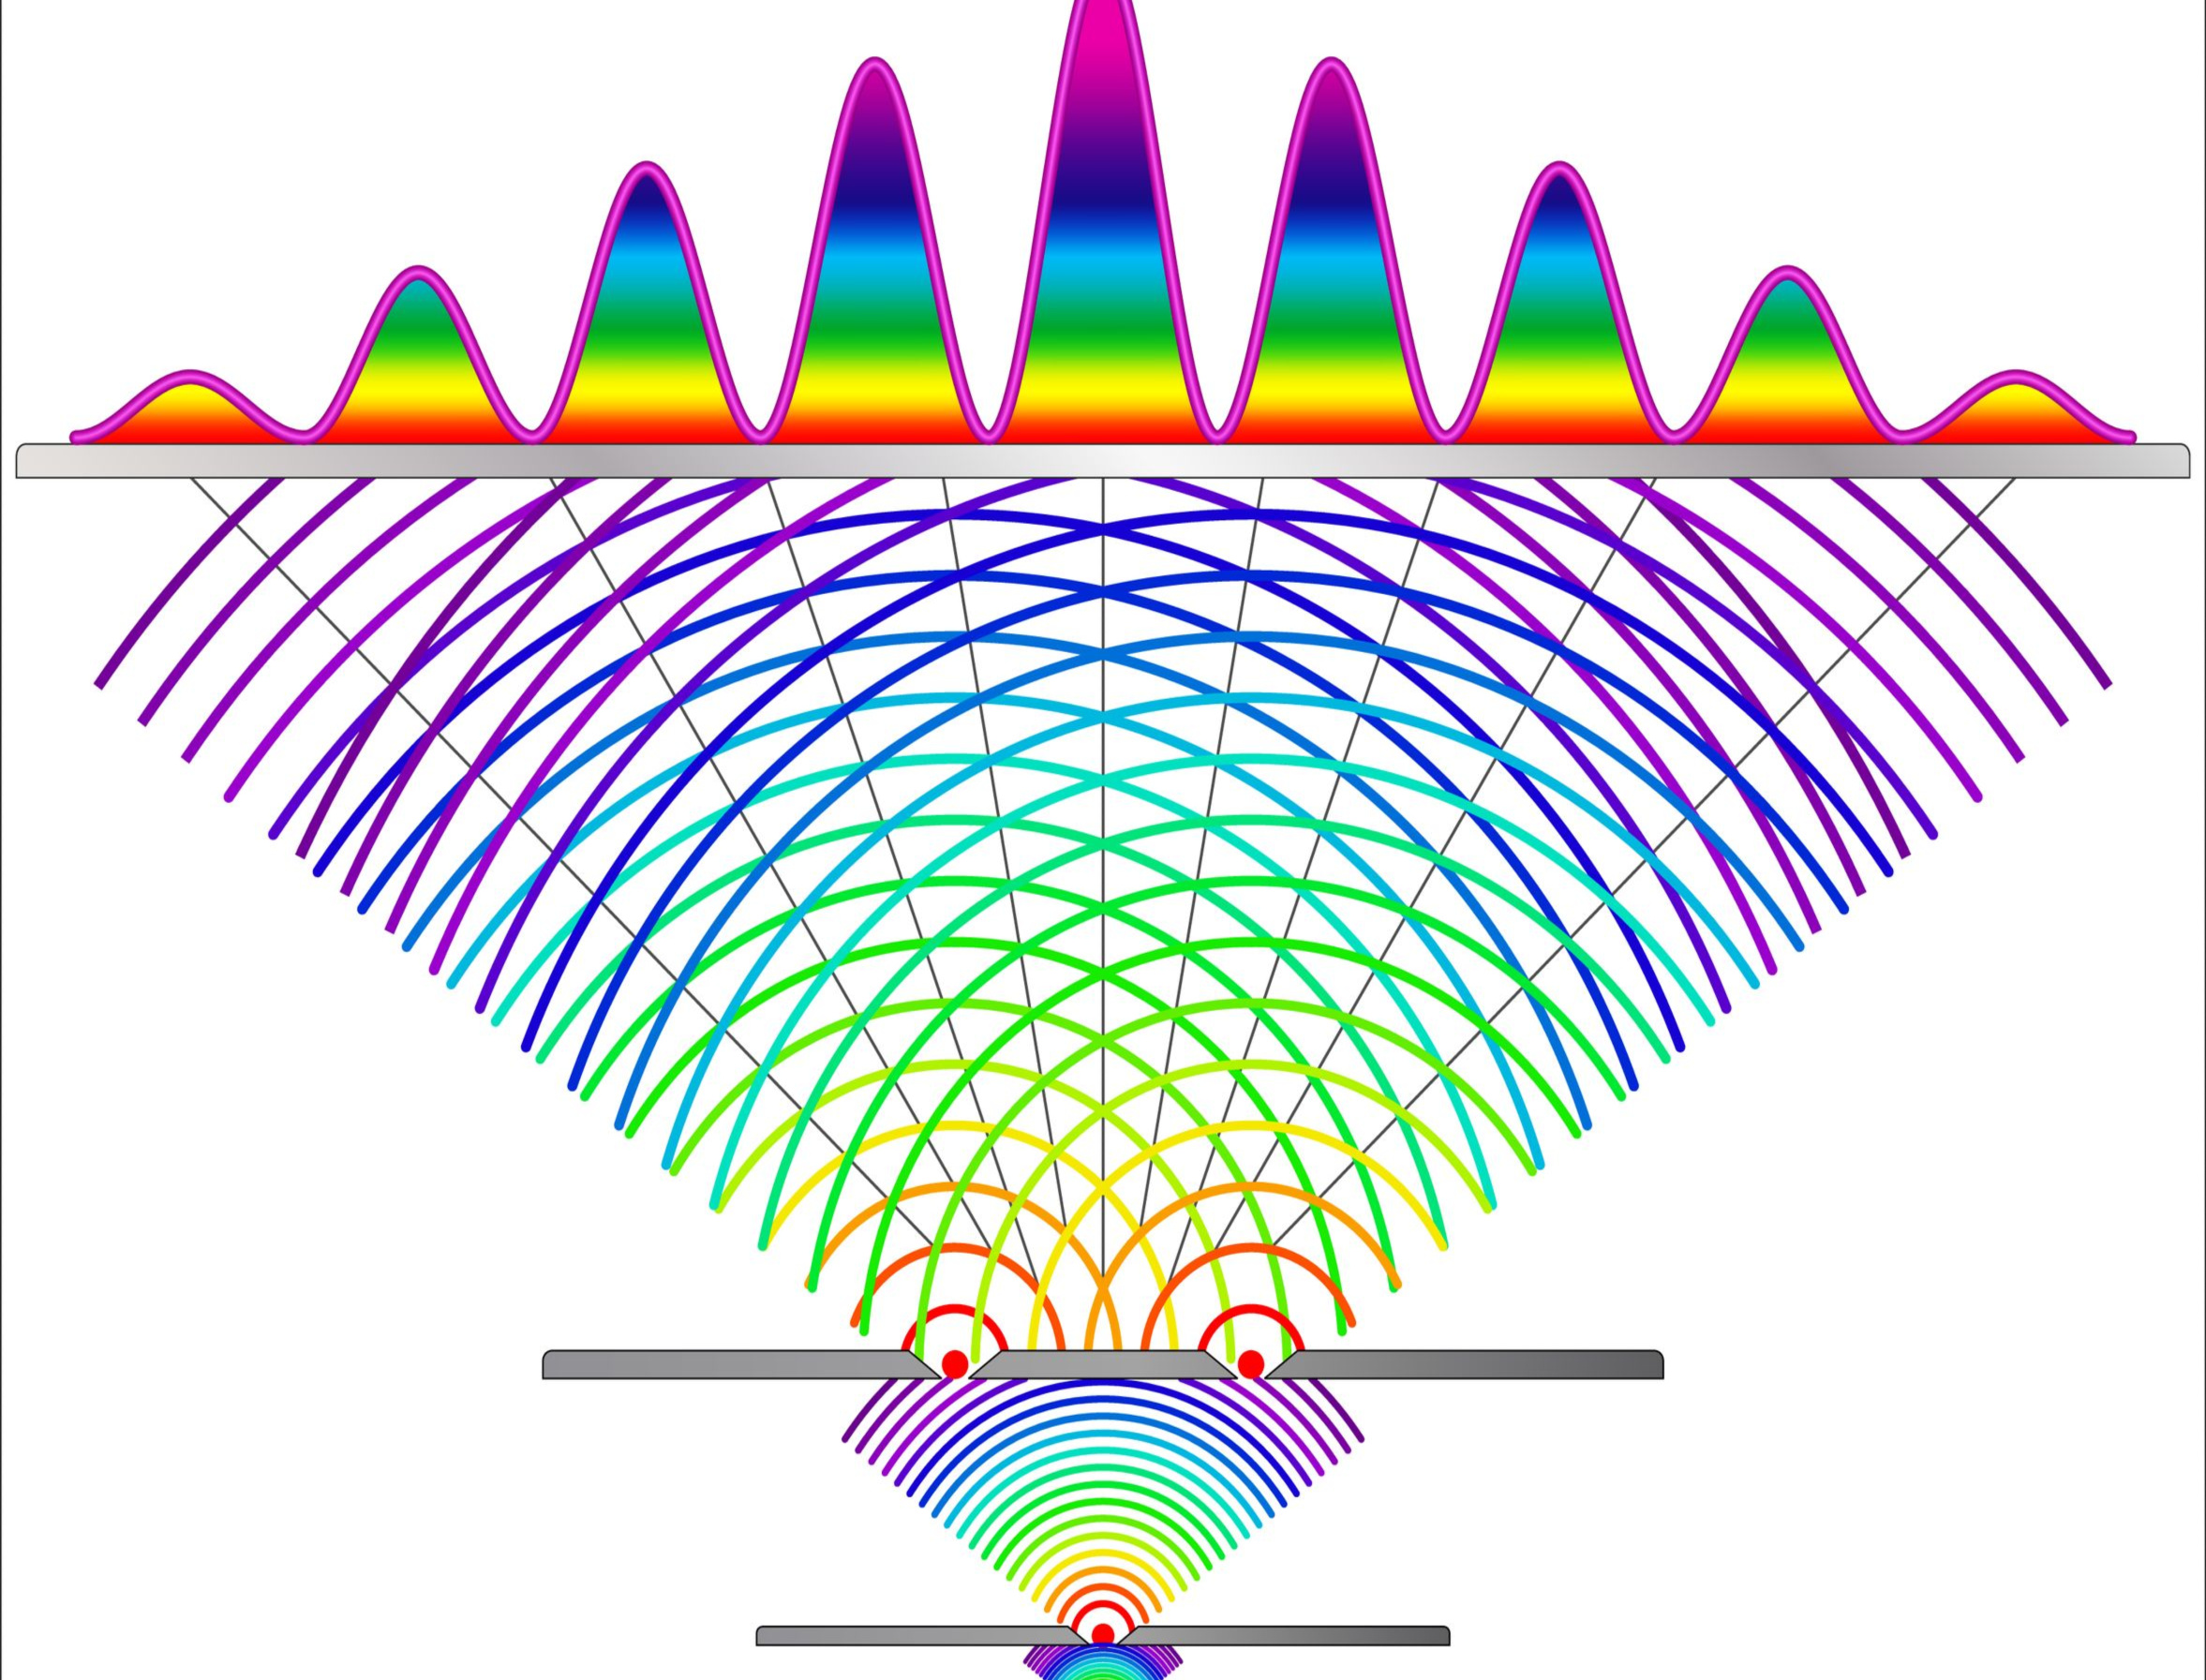 How Much Light Energy Change Can Cause the Variation of Radin’s Double-Slit Fringe?